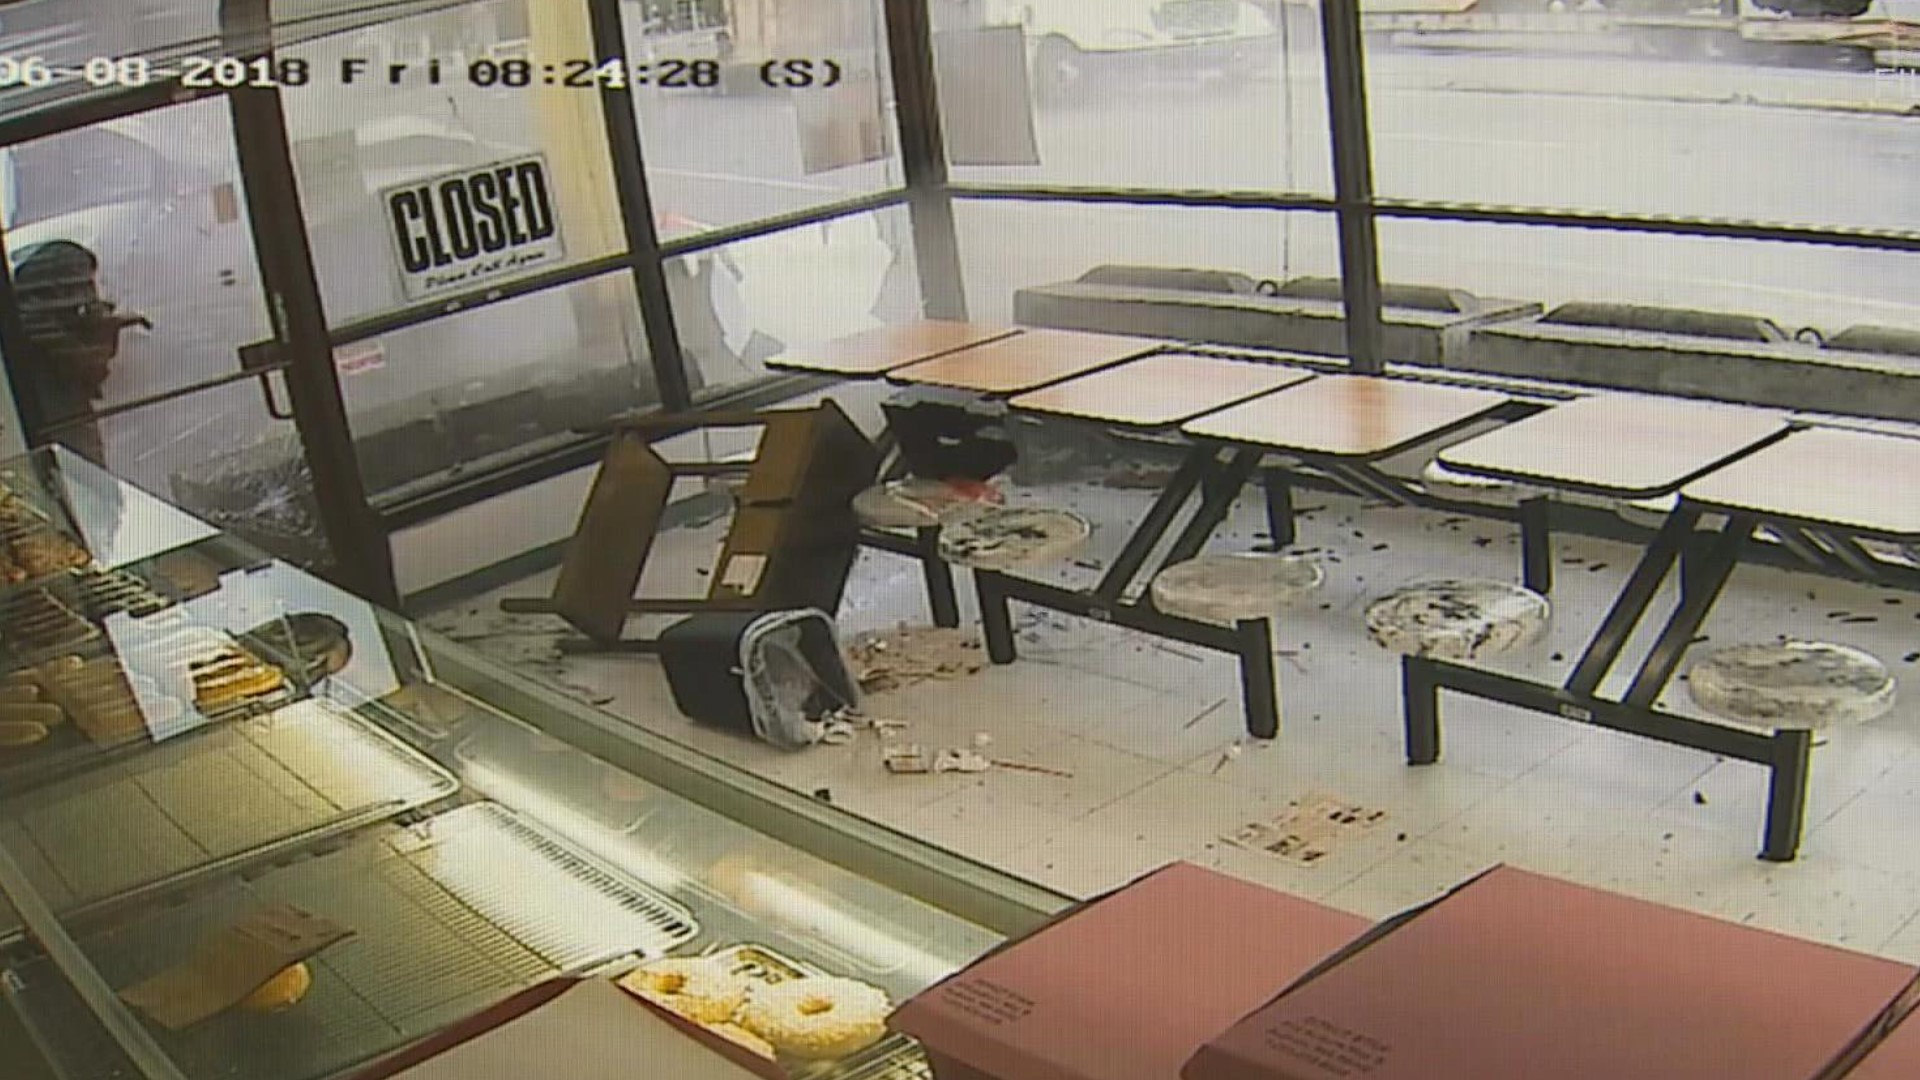 A donut shop in Auburn is cleaning up after a car drove into the store Tuesday night.